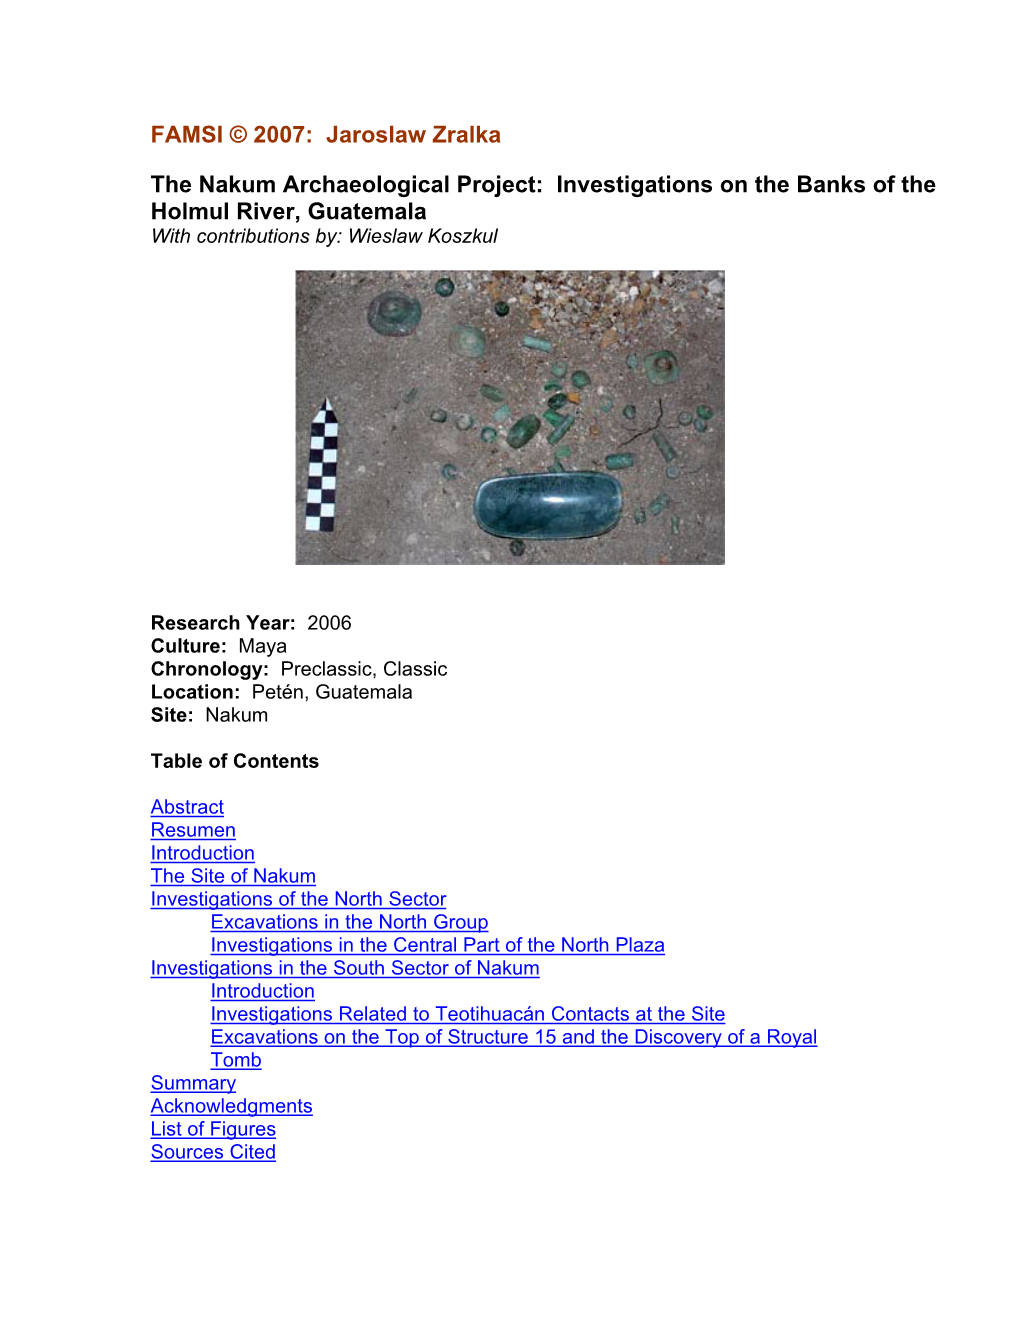 The Nakum Archaeological Project: Investigations on the Banks of the Holmul River, Guatemala with Contributions By: Wieslaw Koszkul